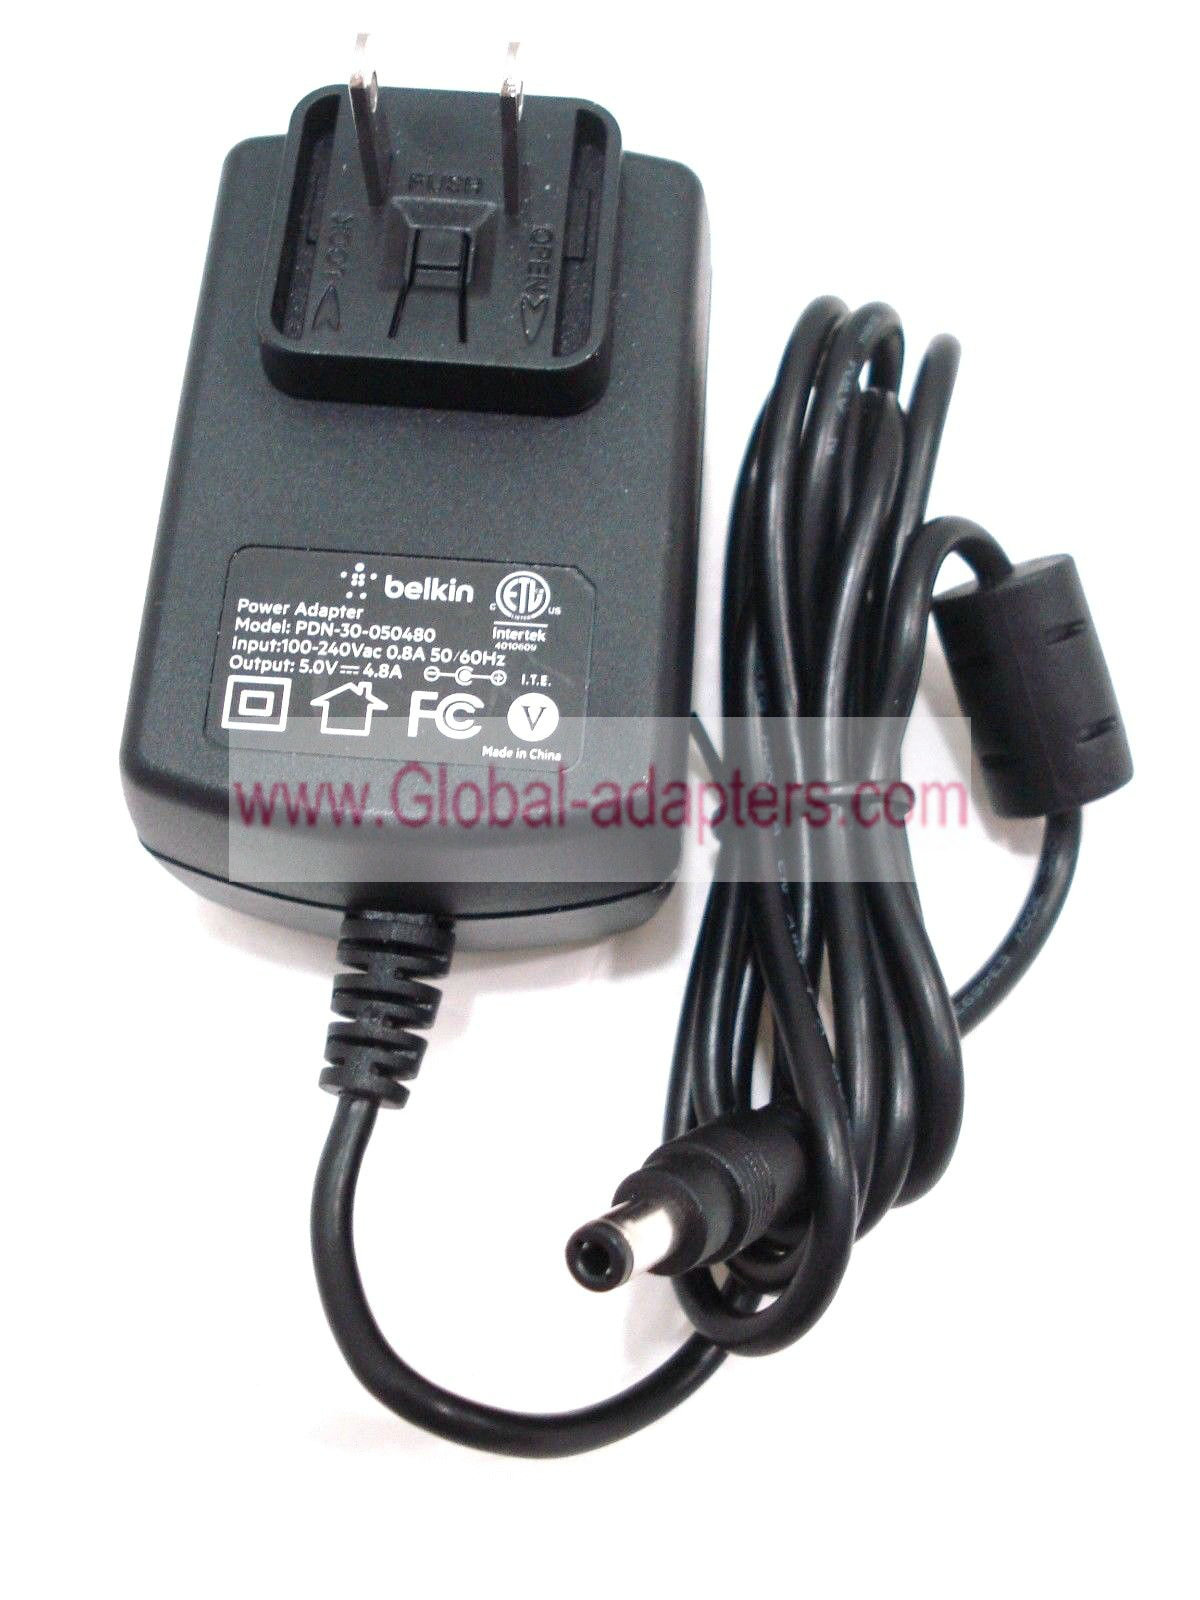 Genuine Belkin 5V 4.8A AC Adapter PDN-30-050480 Power CHARGER New